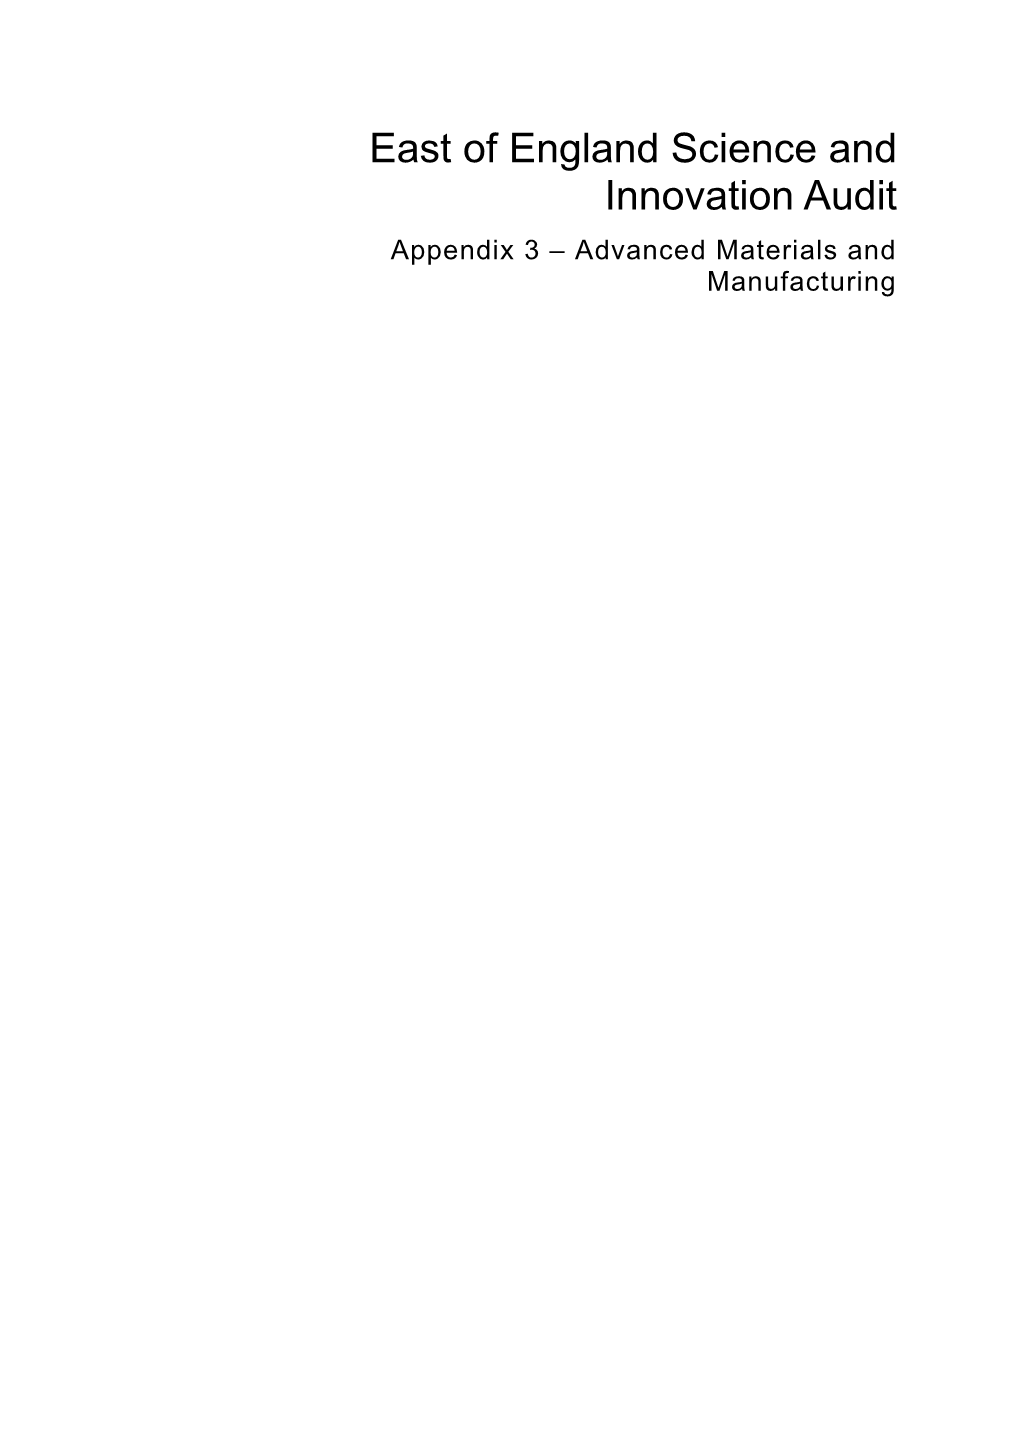 East of England Science and Innovation Audit Appendix 3 – Advanced Materials and Manufacturing